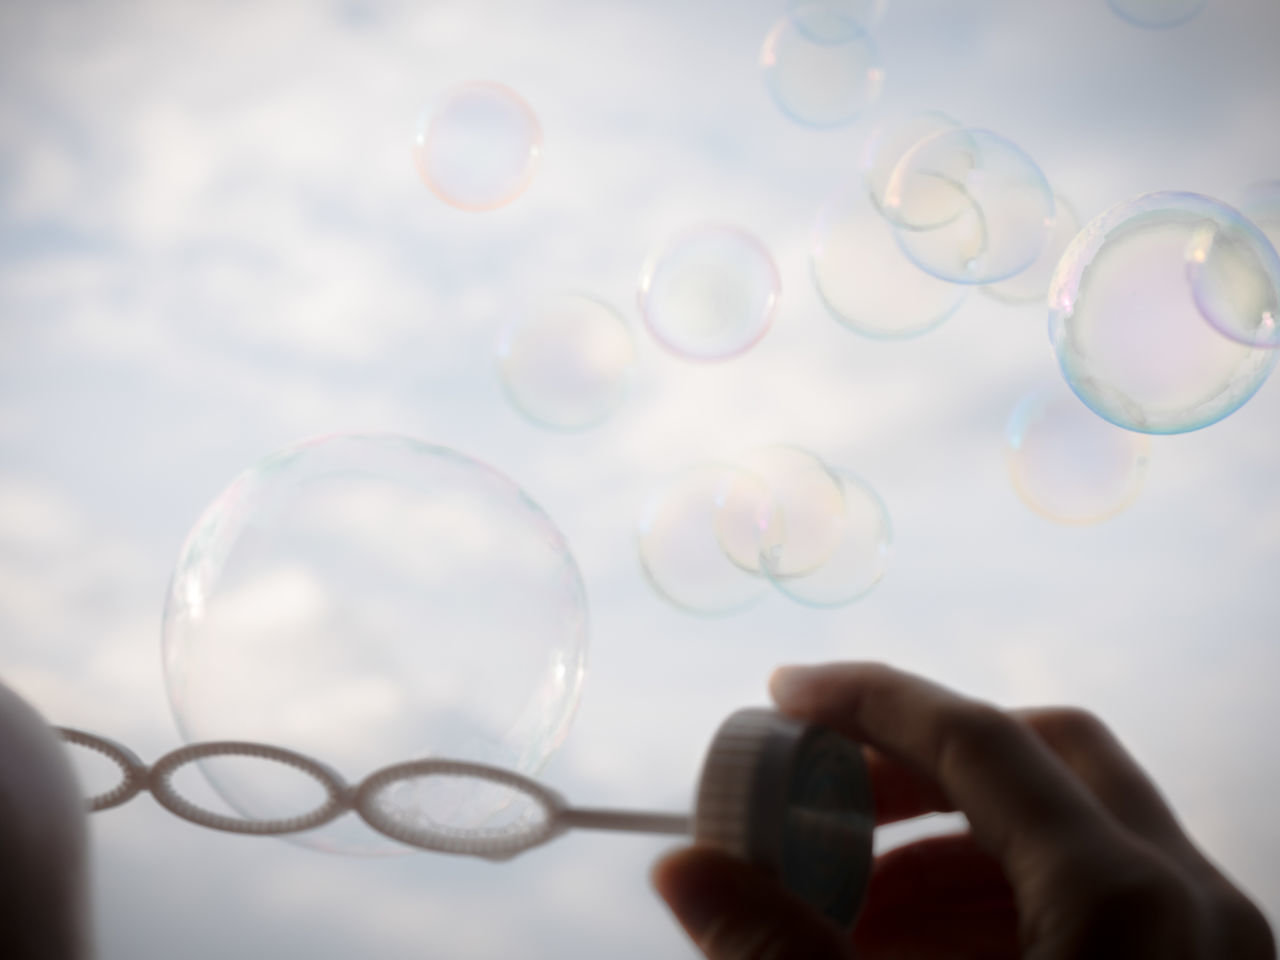 CLOSE-UP OF HAND HOLDING BUBBLES